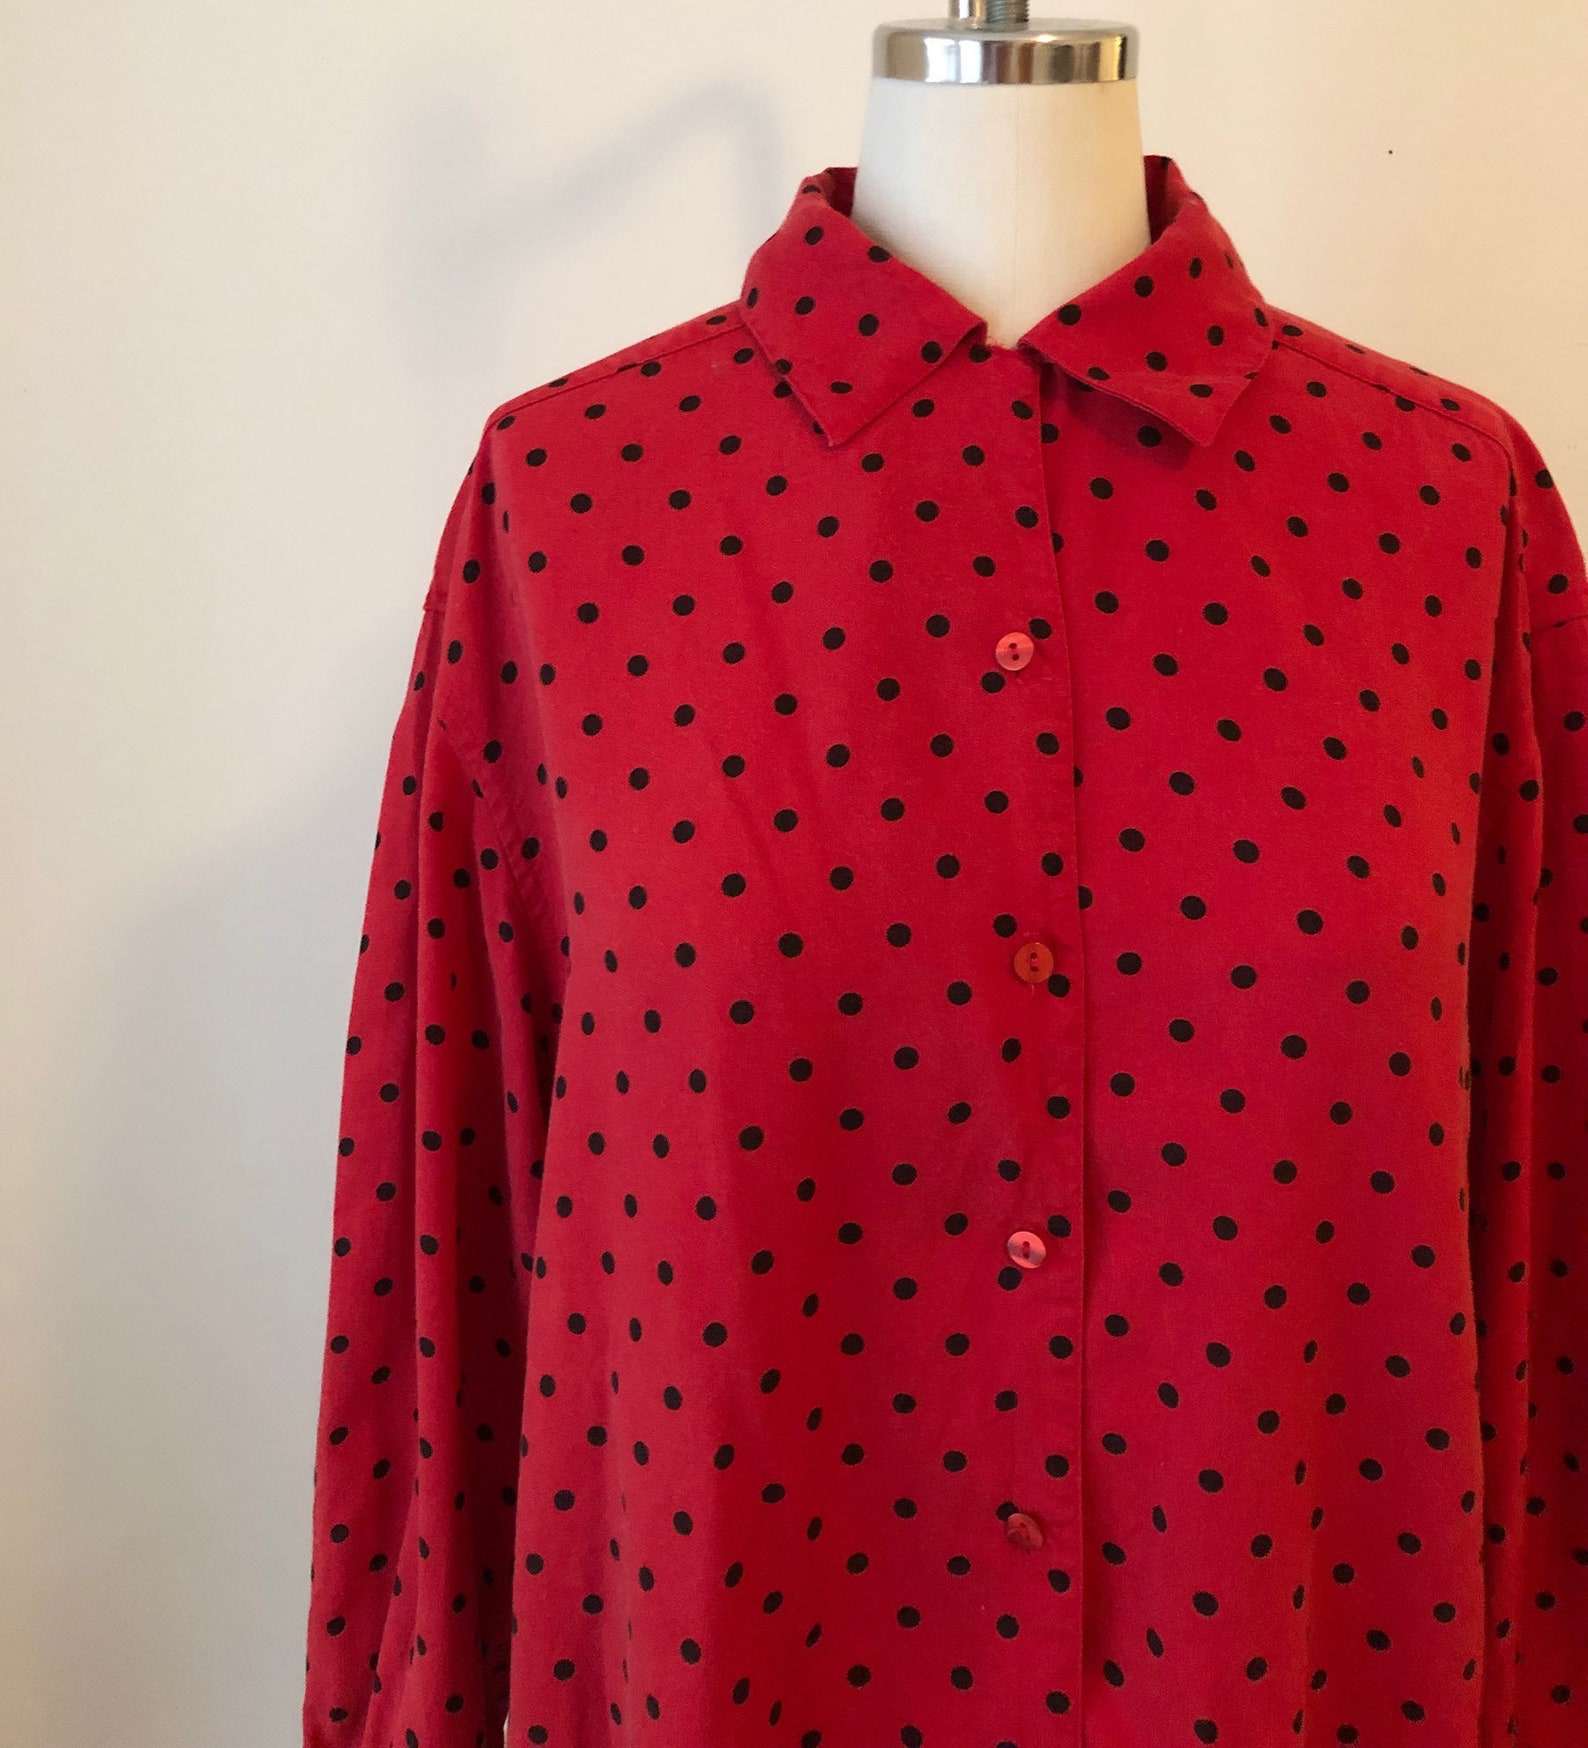 Red and Black Polka Dot Oversized Shirt Early 1990s | Etsy